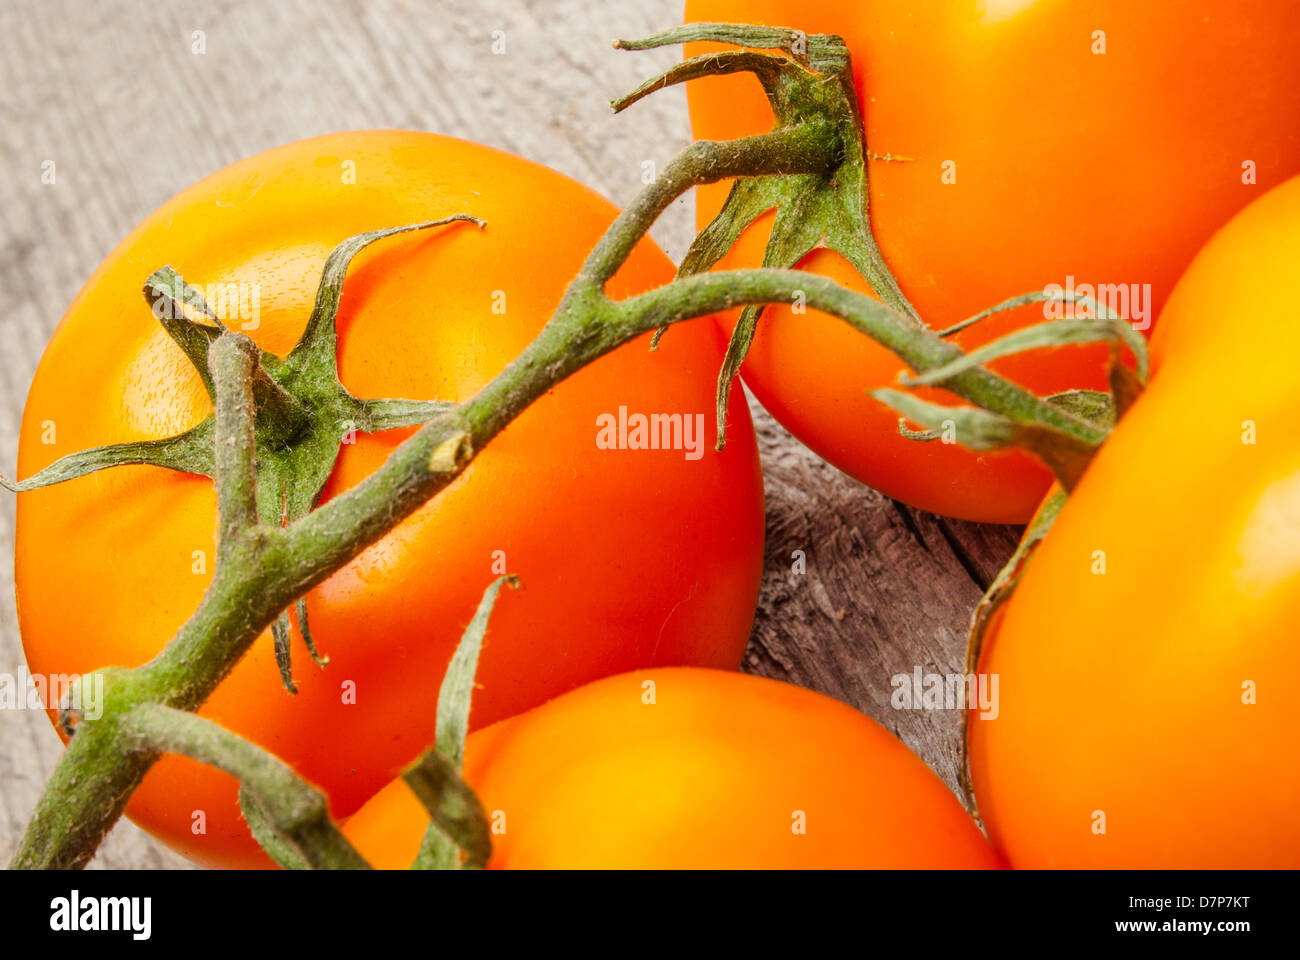 Fragment of Red tomatoes on a brunch wood Stock Photo